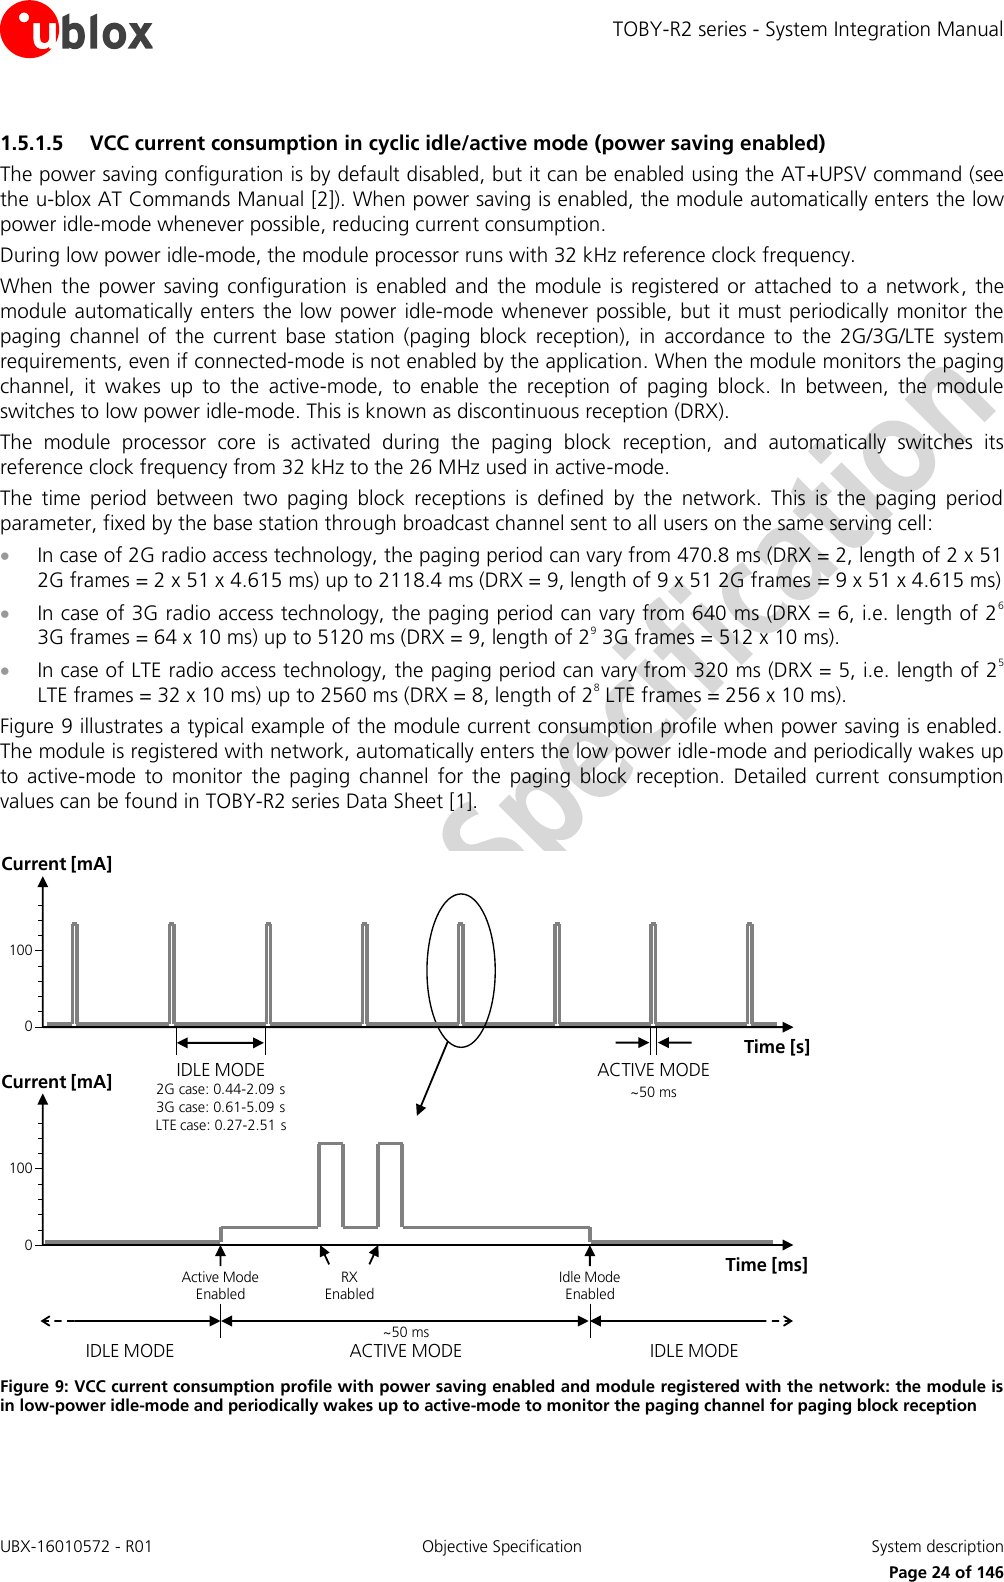 TOBY-R2 series - System Integration Manual UBX-16010572 - R01  Objective Specification  System description     Page 24 of 146 1.5.1.5 VCC current consumption in cyclic idle/active mode (power saving enabled) The power saving configuration is by default disabled, but it can be enabled using the AT+UPSV command (see the u-blox AT Commands Manual [2]). When power saving is enabled, the module automatically enters the low power idle-mode whenever possible, reducing current consumption. During low power idle-mode, the module processor runs with 32 kHz reference clock frequency. When  the  power  saving  configuration  is  enabled  and  the module  is  registered  or  attached  to a  network,  the module automatically enters the low  power idle-mode whenever possible, but it must periodically  monitor the paging  channel  of  the  current  base  station  (paging  block  reception),  in  accordance  to  the  2G/3G/LTE  system requirements, even if connected-mode is not enabled by the application. When the module monitors the paging channel,  it  wakes  up  to  the  active-mode,  to  enable  the  reception  of  paging  block.  In  between,  the  module switches to low power idle-mode. This is known as discontinuous reception (DRX). The  module  processor  core  is  activated  during  the  paging  block  reception,  and  automatically  switches  its reference clock frequency from 32 kHz to the 26 MHz used in active-mode. The  time  period  between  two  paging  block  receptions  is  defined  by  the  network.  This  is  the  paging  period parameter, fixed by the base station through broadcast channel sent to all users on the same serving cell:  In case of 2G radio access technology, the paging period can vary from 470.8 ms (DRX = 2, length of 2 x 51 2G frames = 2 x 51 x 4.615 ms) up to 2118.4 ms (DRX = 9, length of 9 x 51 2G frames = 9 x 51 x 4.615 ms)  In case of 3G radio access technology, the paging period can vary from 640 ms (DRX = 6, i.e. length of 26 3G frames = 64 x 10 ms) up to 5120 ms (DRX = 9, length of 29 3G frames = 512 x 10 ms).  In case of LTE radio access technology, the paging period can vary from 320 ms (DRX = 5, i.e. length of 25 LTE frames = 32 x 10 ms) up to 2560 ms (DRX = 8, length of 28 LTE frames = 256 x 10 ms). Figure 9 illustrates a typical example of the module current consumption profile when power saving is enabled. The module is registered with network, automatically enters the low power idle-mode and periodically wakes up to  active-mode  to  monitor  the  paging  channel  for  the  paging  block  reception.  Detailed  current  consumption values can be found in TOBY-R2 series Data Sheet [1].  ~50 msIDLE MODE ACTIVE MODE IDLE MODEActive Mode EnabledIdle Mode Enabled2G case: 0.44-2.09 s    3G case: 0.61-5.09 s LTE case: 0.27-2.51 sIDLE MODE~50 msACTIVE MODETime [s]Current [mA]Time [ms]Current [mA]RX Enabled01000100 Figure 9: VCC current consumption profile with power saving enabled and module registered with the network: the module is in low-power idle-mode and periodically wakes up to active-mode to monitor the paging channel for paging block reception  